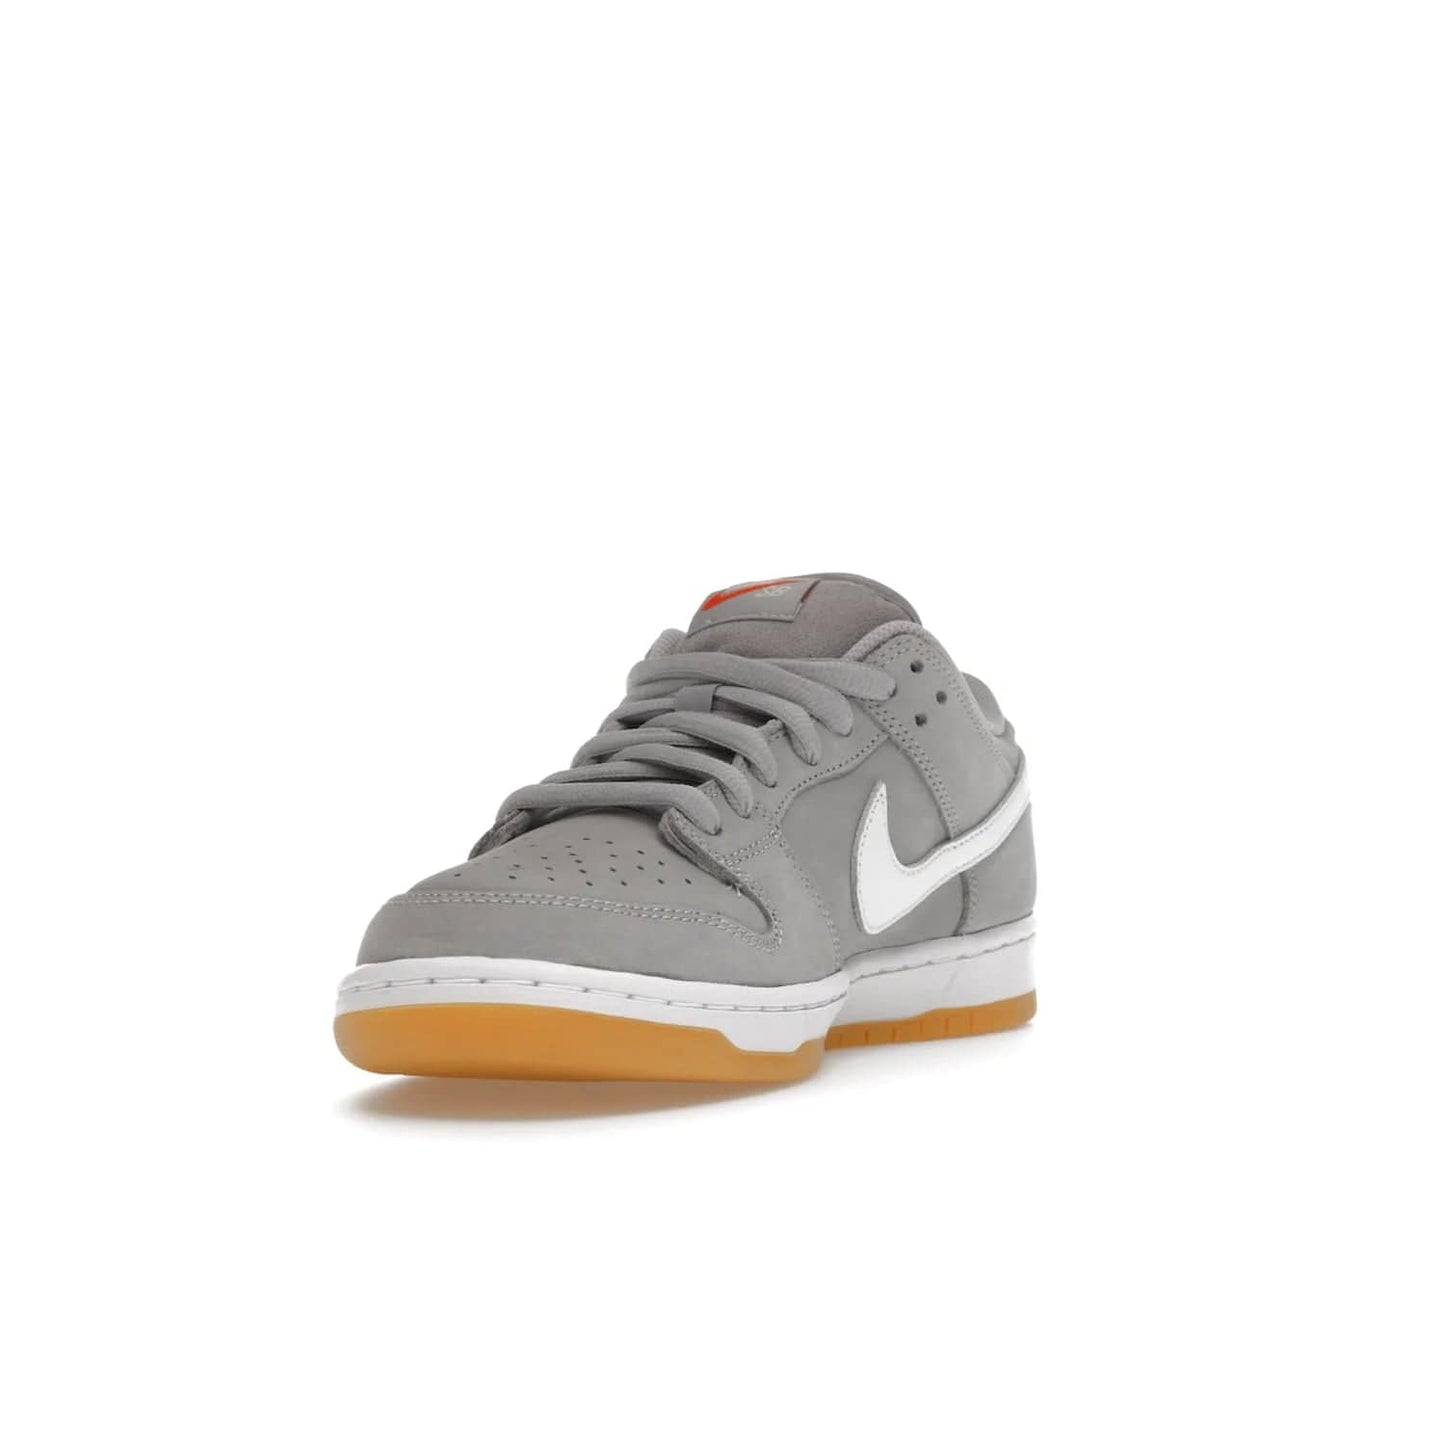 Nike SB Dunk Low Pro ISO Orange Label Wolf Grey Gum - Image 13 - Only at www.BallersClubKickz.com - Introducing Nike's SB Dunk Low Pro ISO Orange Label Wolf Grey Gum - a stylish shoe with a premium Wolf Grey upper, white leather Nike Swoosh, and an eye-catching gum outsole. With special Nike branding and packaging, this shoe adds a unique fashion statement. Out Feb. 24, 2023.